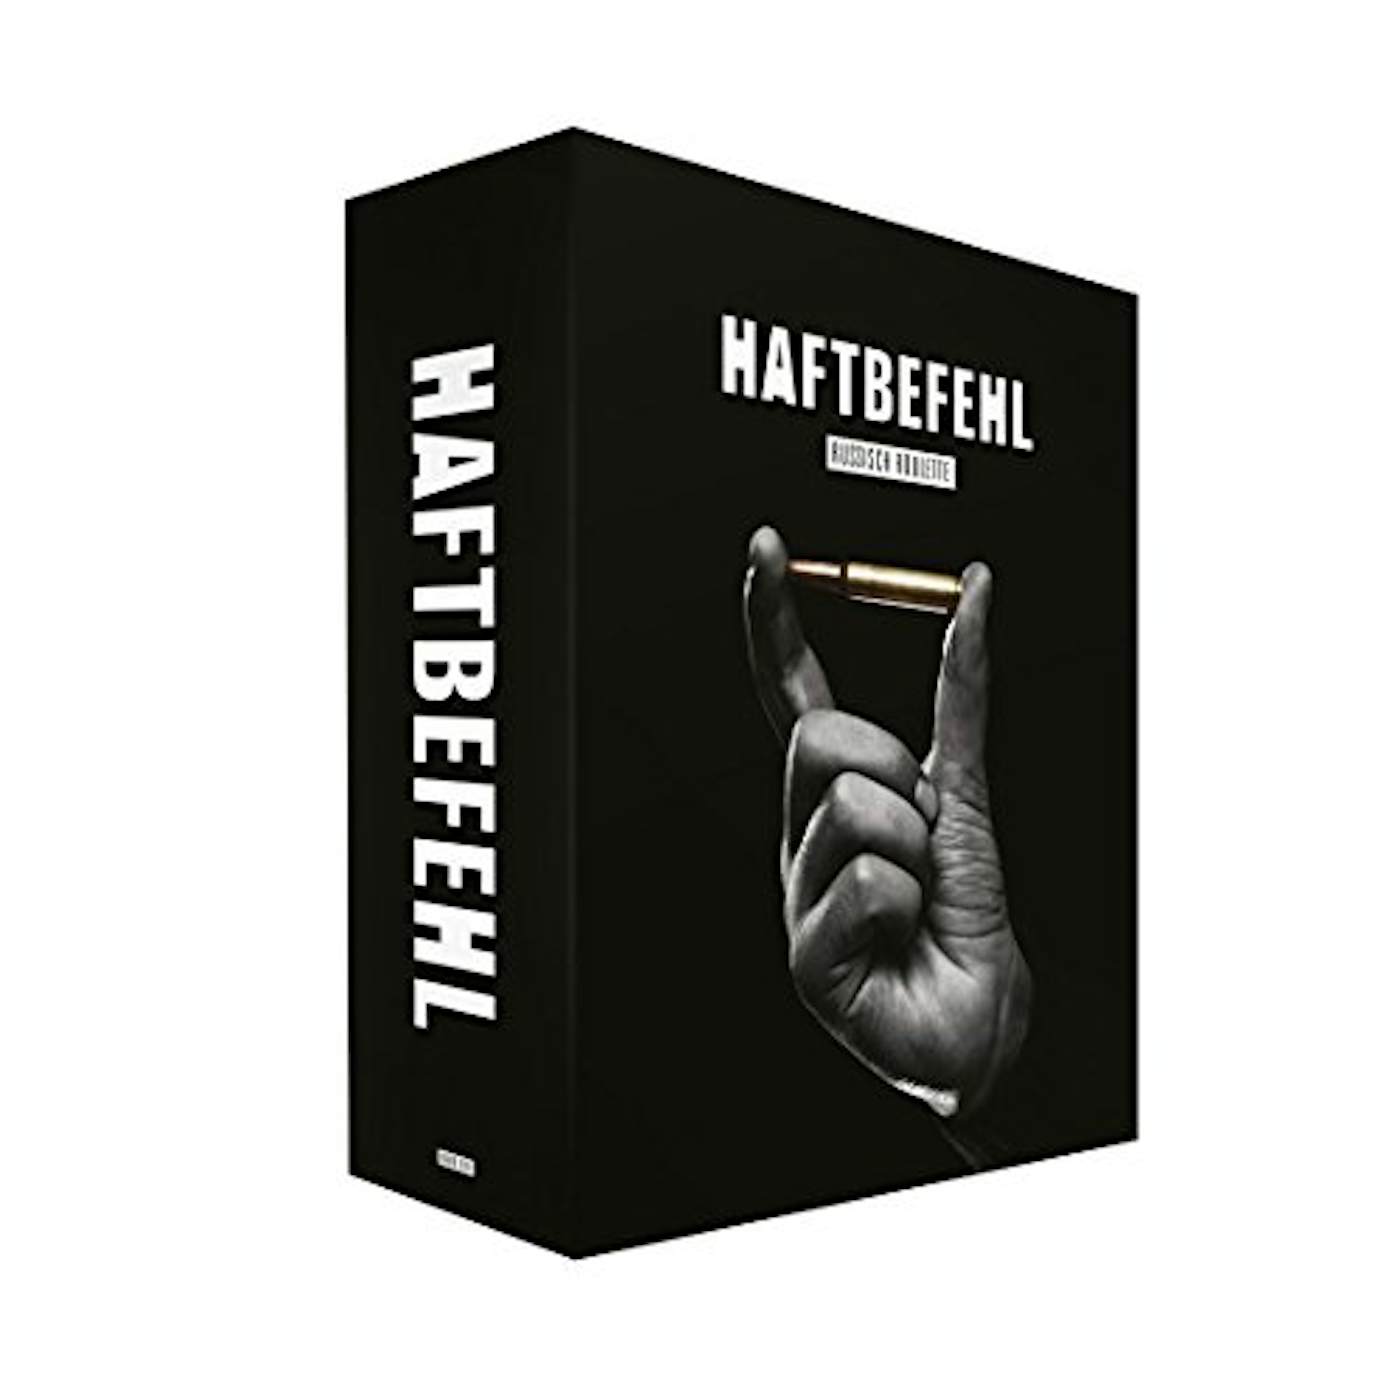 Haftbefehl RUSSISCH ROULETTE: LIMITED EDITION CD